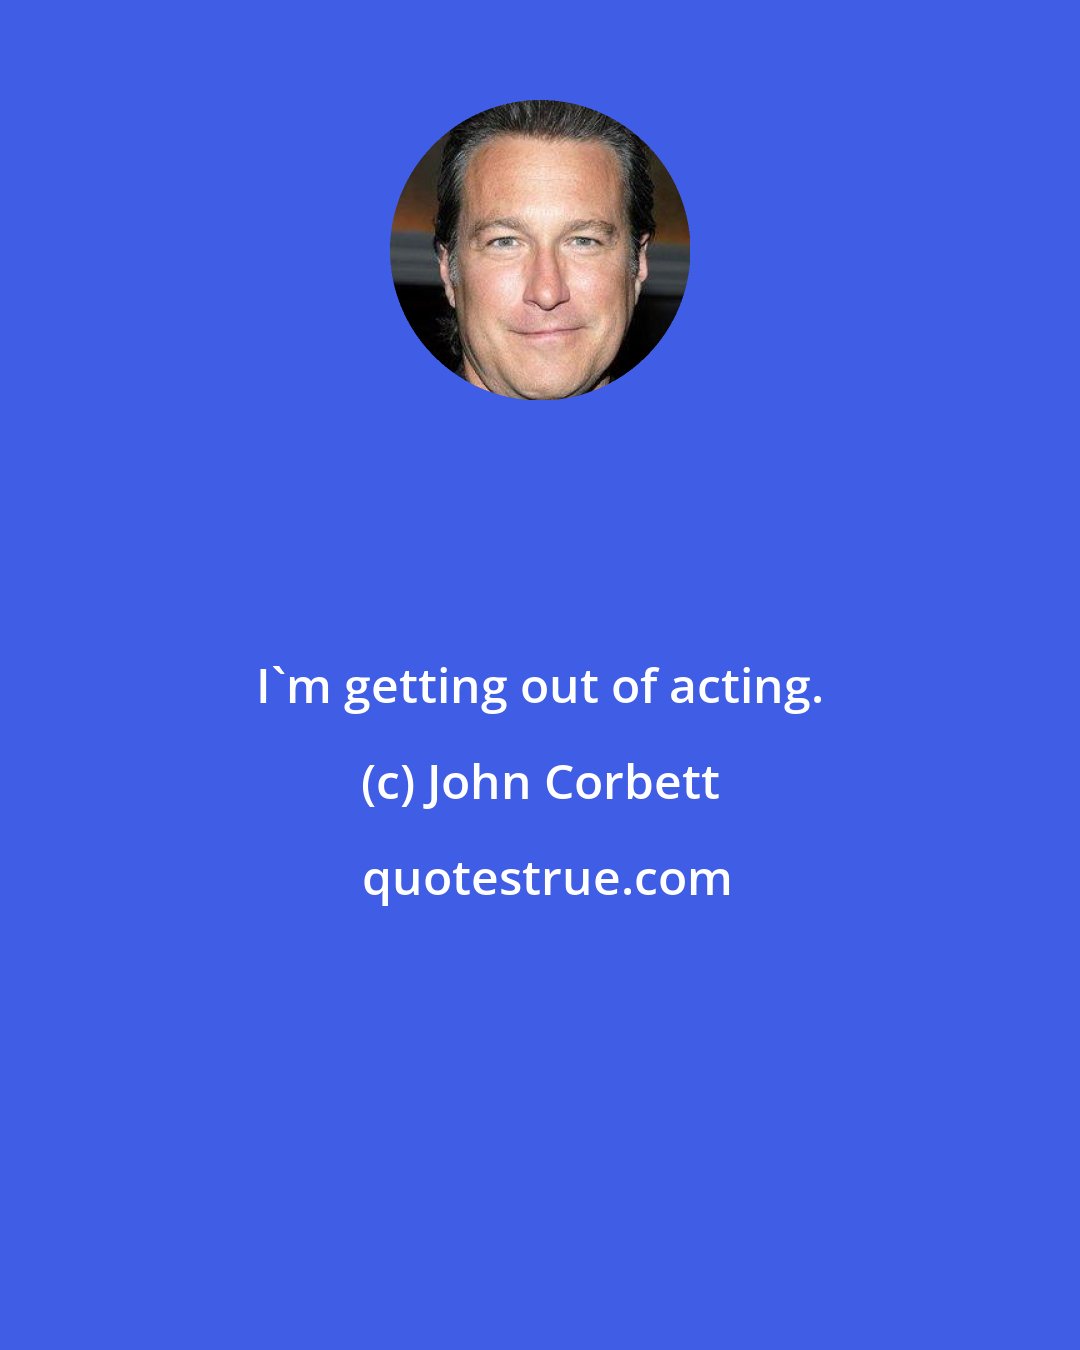 John Corbett: I'm getting out of acting.